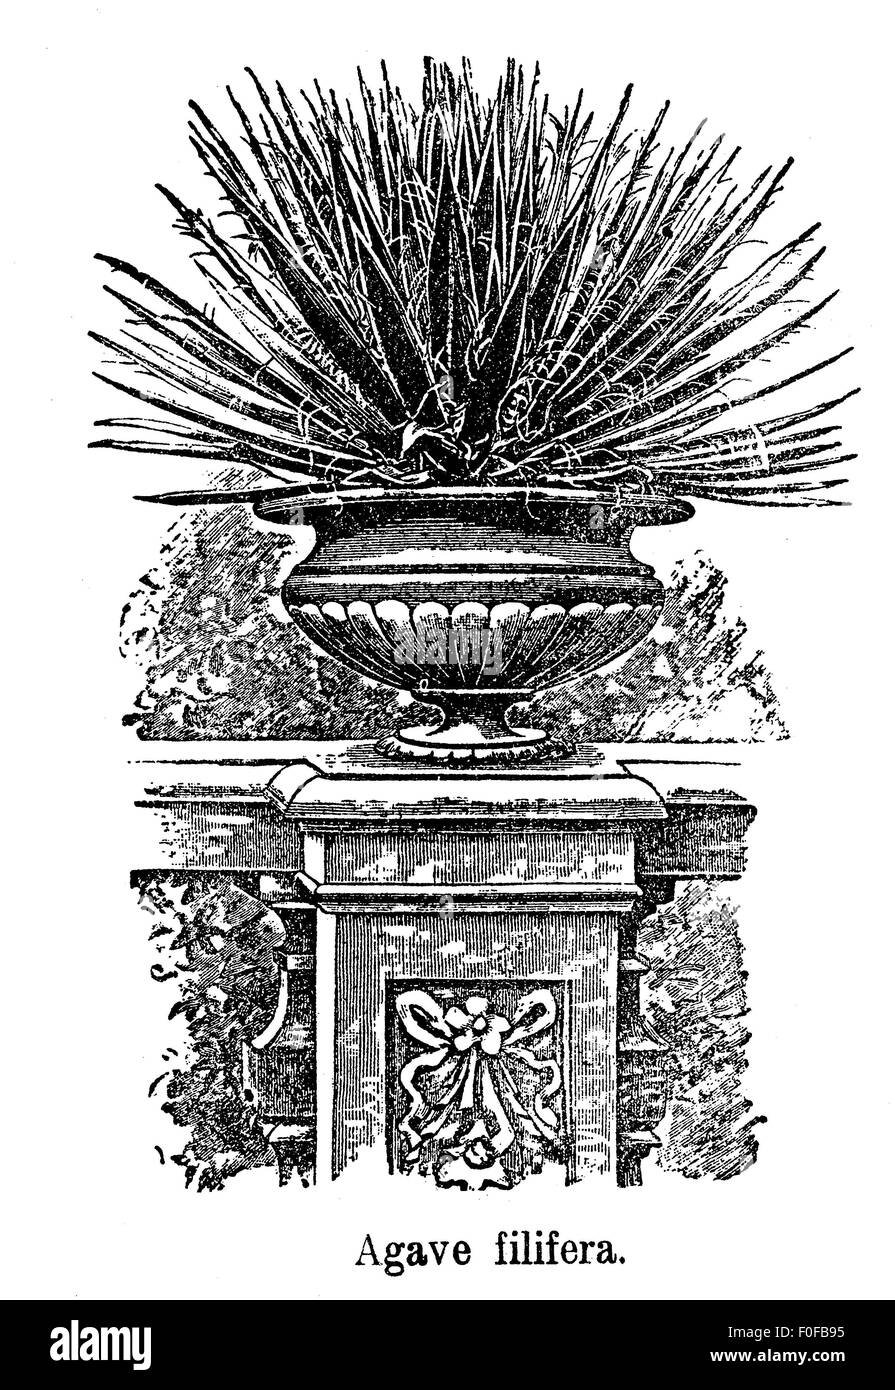 Engraving of ornamental garden with thread agave plant (Agave filifera) in stone vase Stock Photo